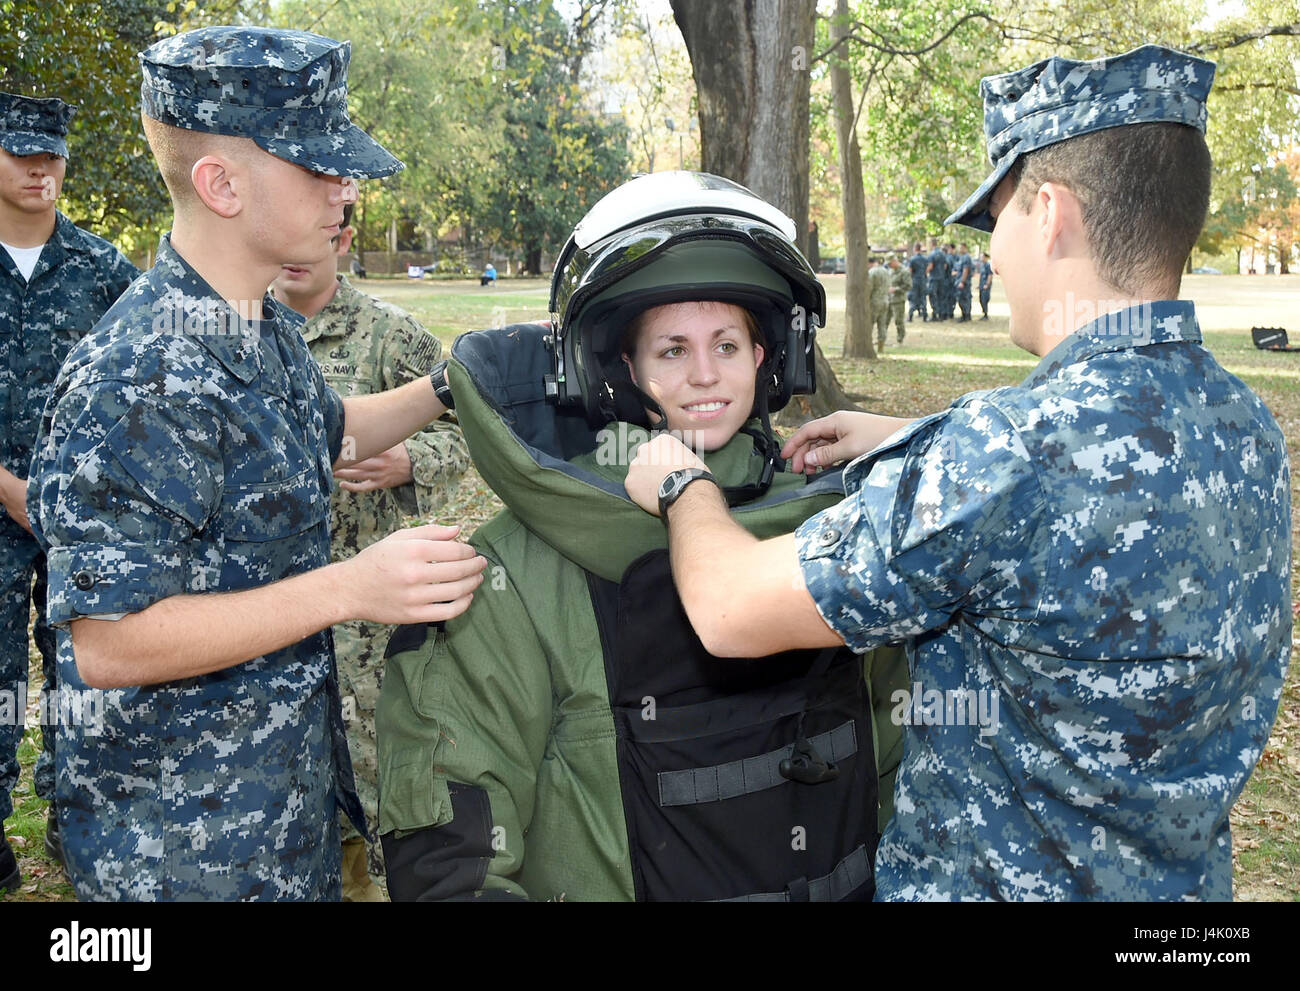 161105-N-IK959-325  NASHVILLE, Tenn. (Nov. 4, 2016) Vanderbilt University Naval Reserve Officers Training Corps (NROTC) Midshipman 2nd Class, Maddie Hoffman is “suited up” in an EOD9 Bomb Suit by Midshipman 4th Class Alex McLaren, right, and Midshipman 3rd Class Nicholas Piccioli on the Vanderbilt campus. Vanderbilt NROTC hosted an Explosive Ordnance Disposal (EOD) “Exceptional Exposure” weekend for more than 40 NROTC midshipmen from units around the country. (U.S. Navy image by Scott A. Thornbloom/Released) Stock Photo